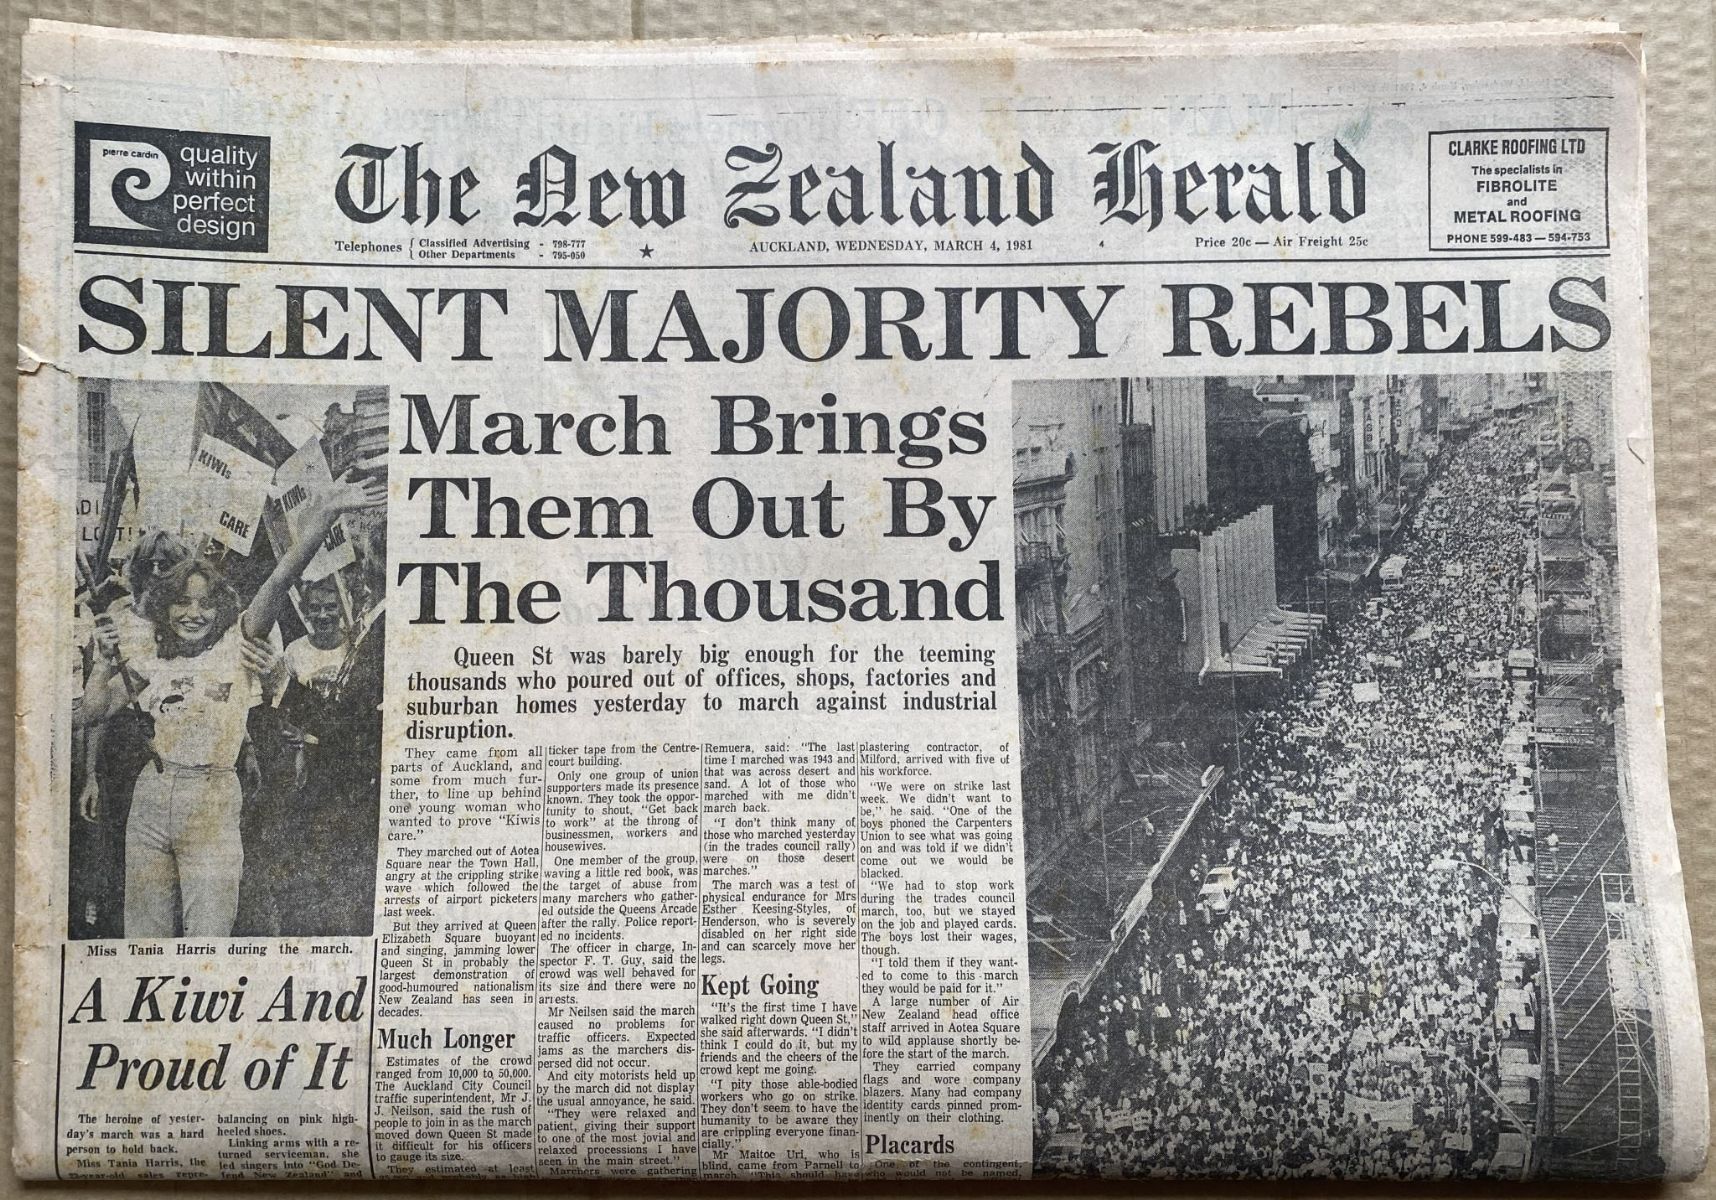 OLD NEWSPAPER: The New Zealand Herald, 4 March 1981 - Queen Street March